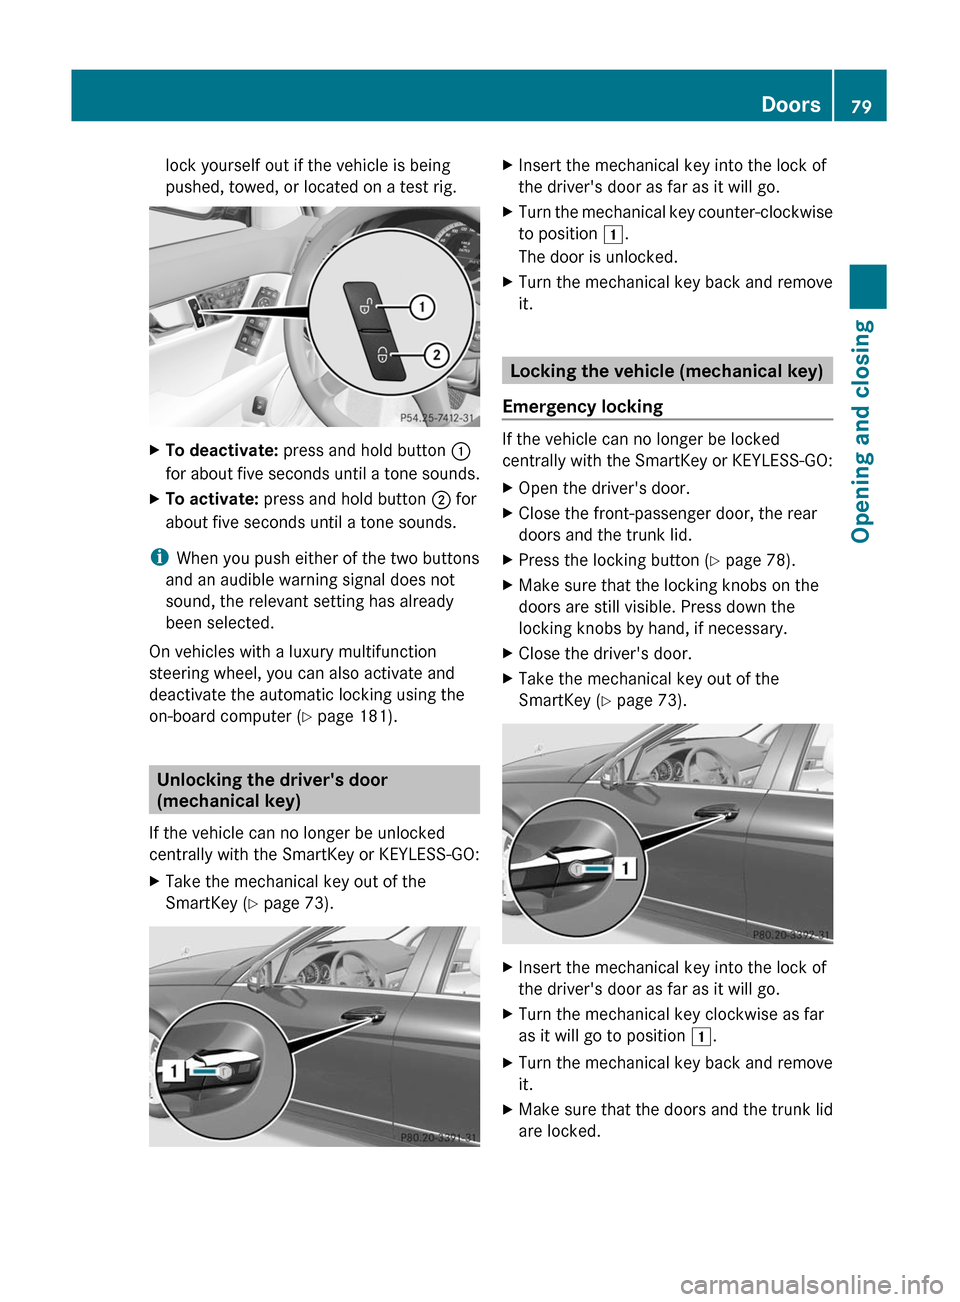 MERCEDES-BENZ C-Class 2011 W204 Owners Manual lock yourself out if the vehicle is being
pushed, towed, or located on a test rig.
XTo deactivate: press and hold button :
for about five seconds until a tone sounds.
XTo activate: press and hold butt